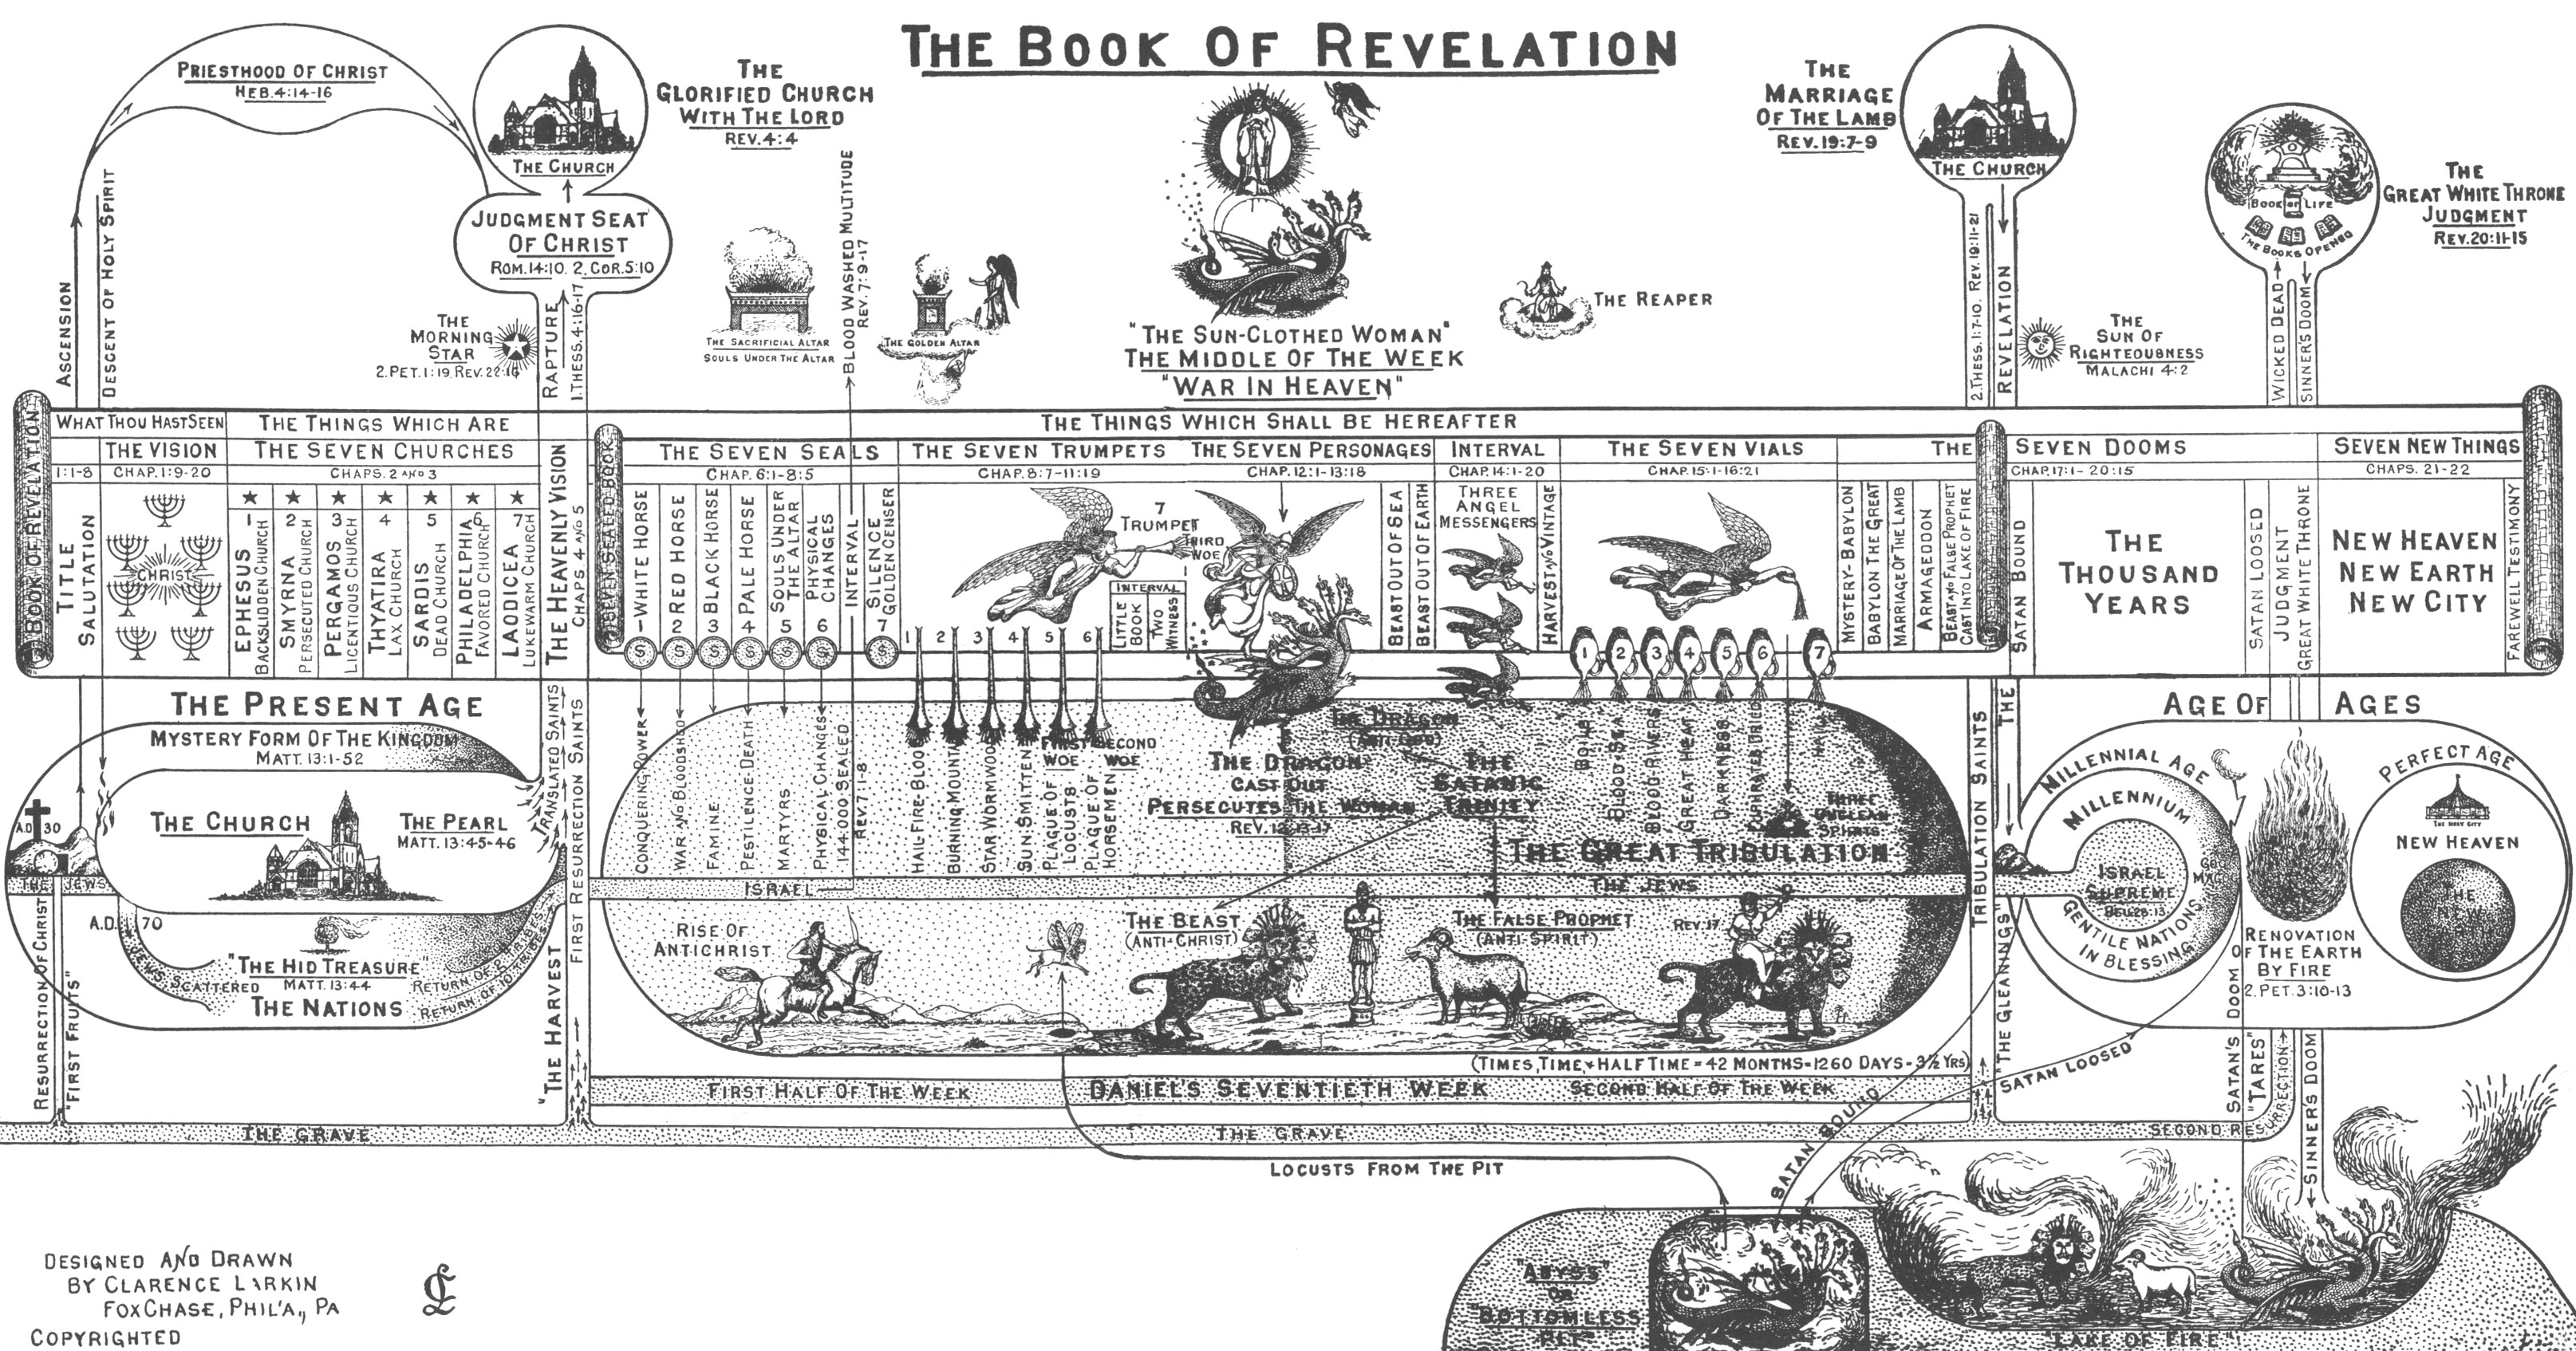 The Book of Revelation Illustration by Clarence Larkin